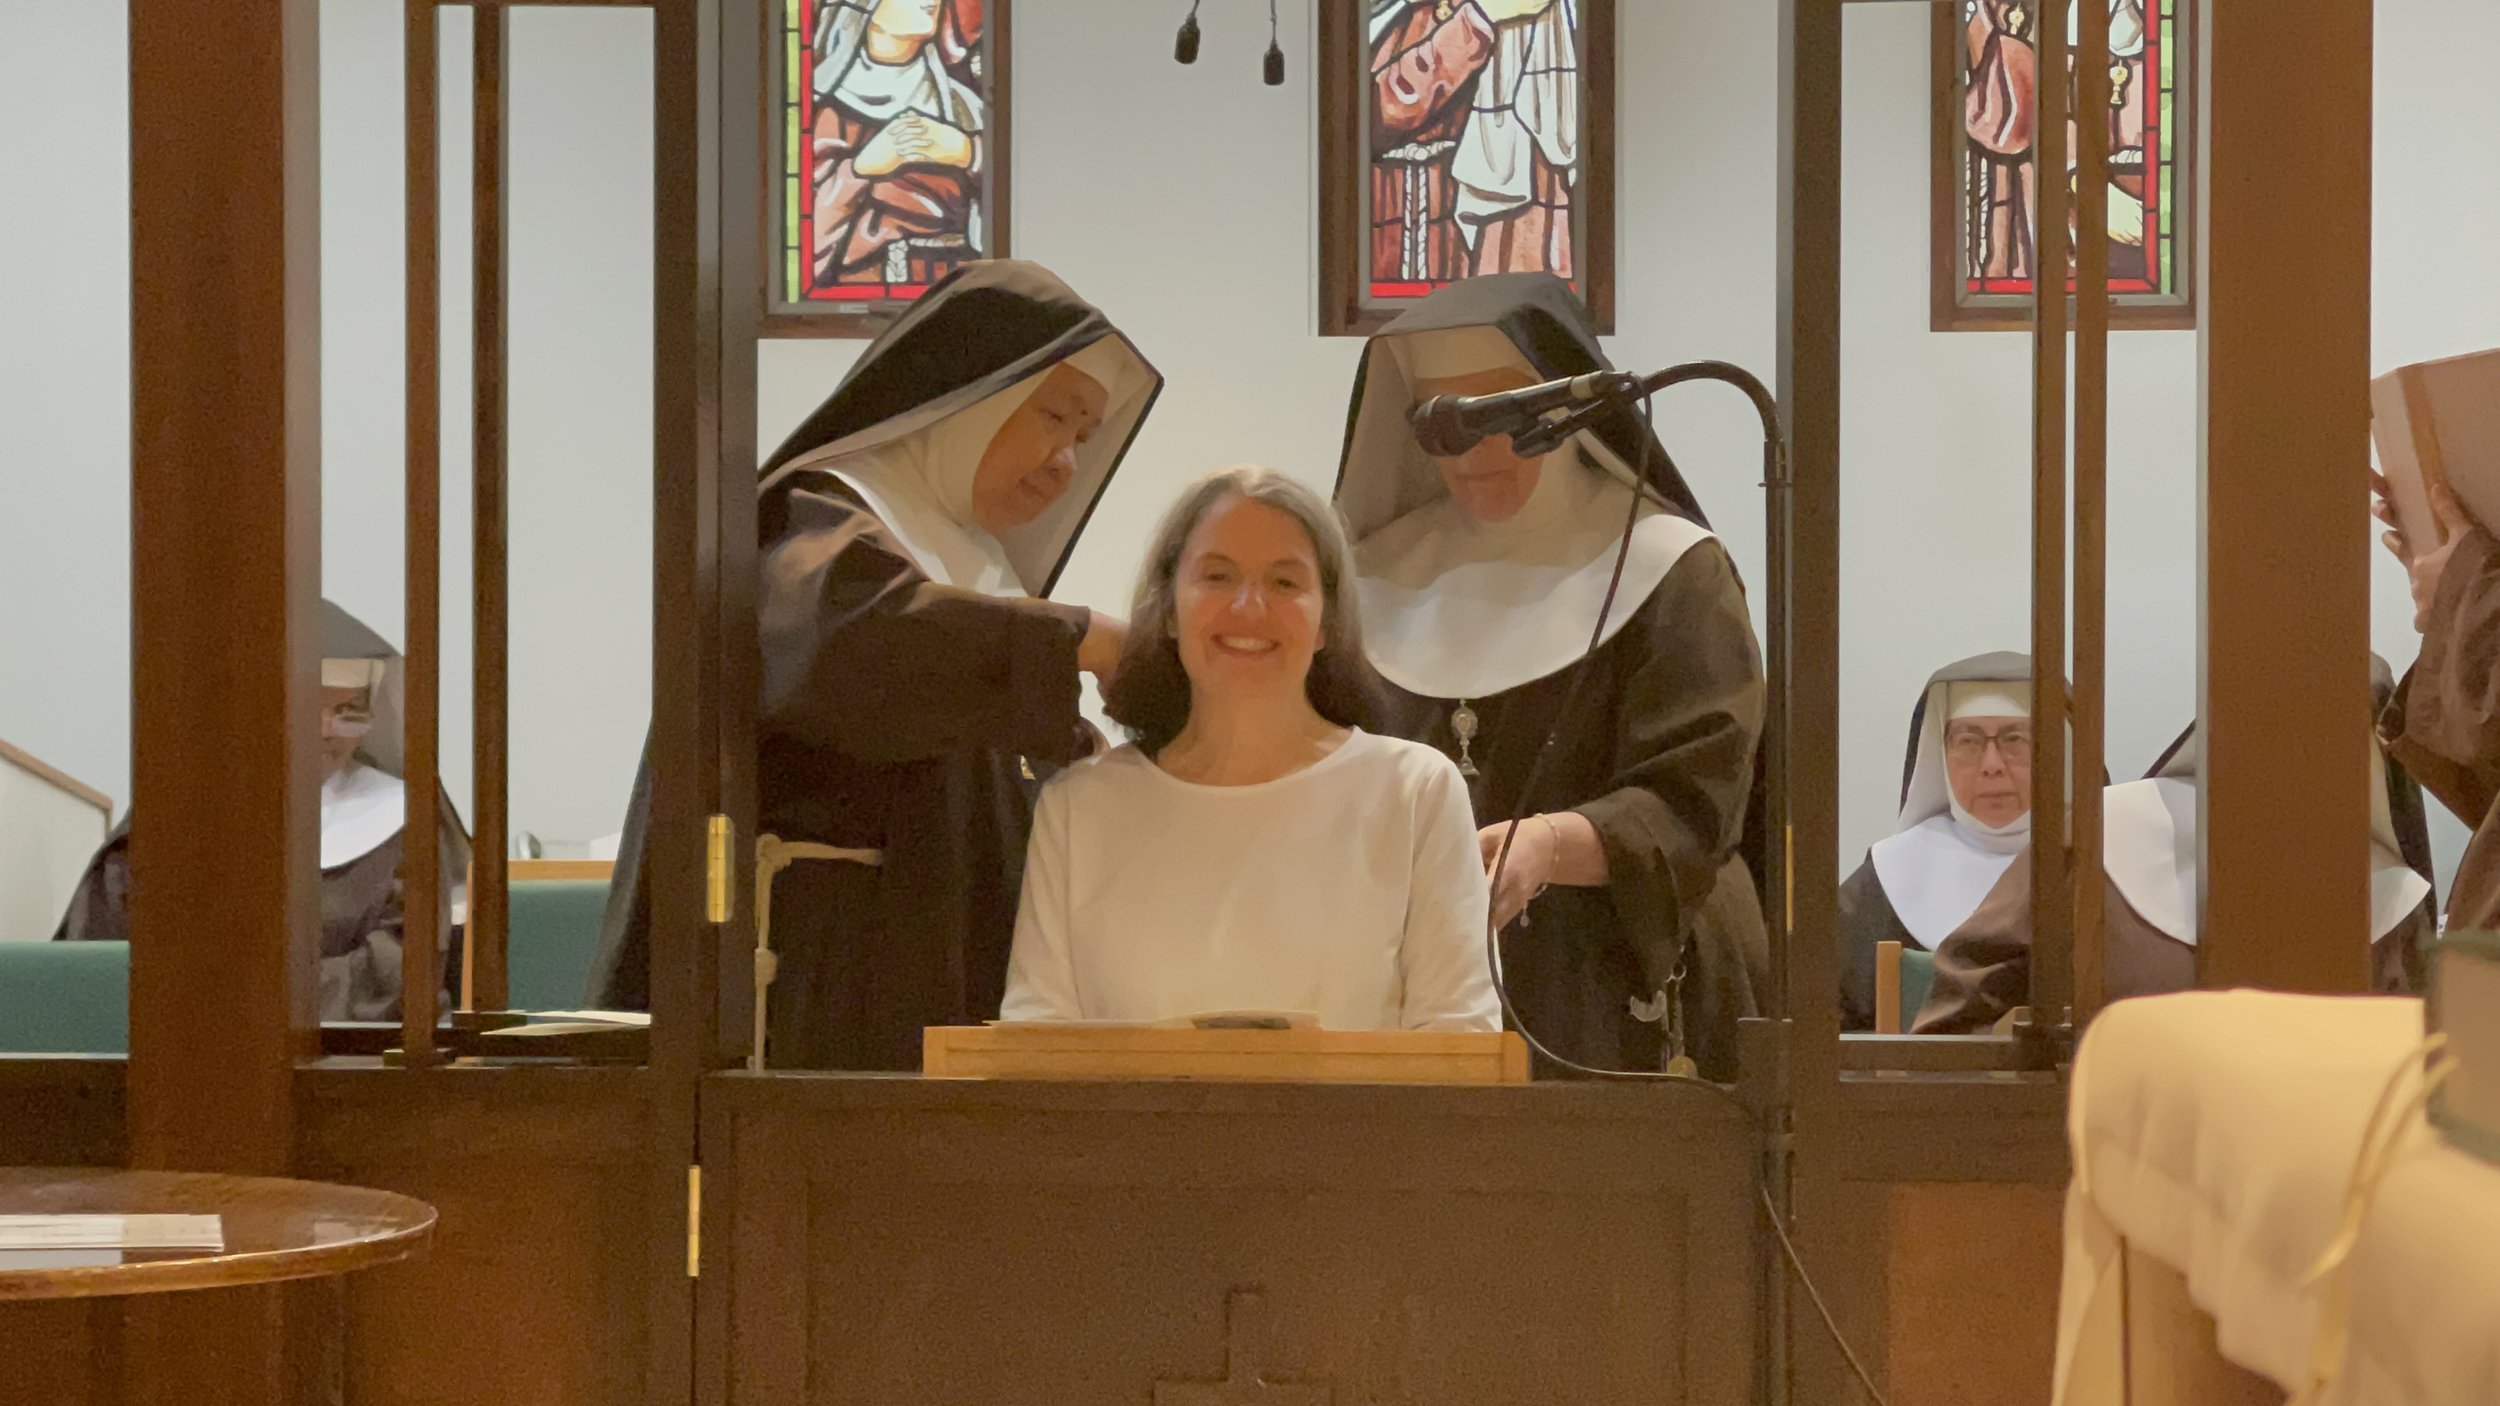 The cutting of the hair before being invested in our Holy Habit goes back to St. Francis cutting St. Clare’s hair as a sign that she is belongs to God and the religious life.